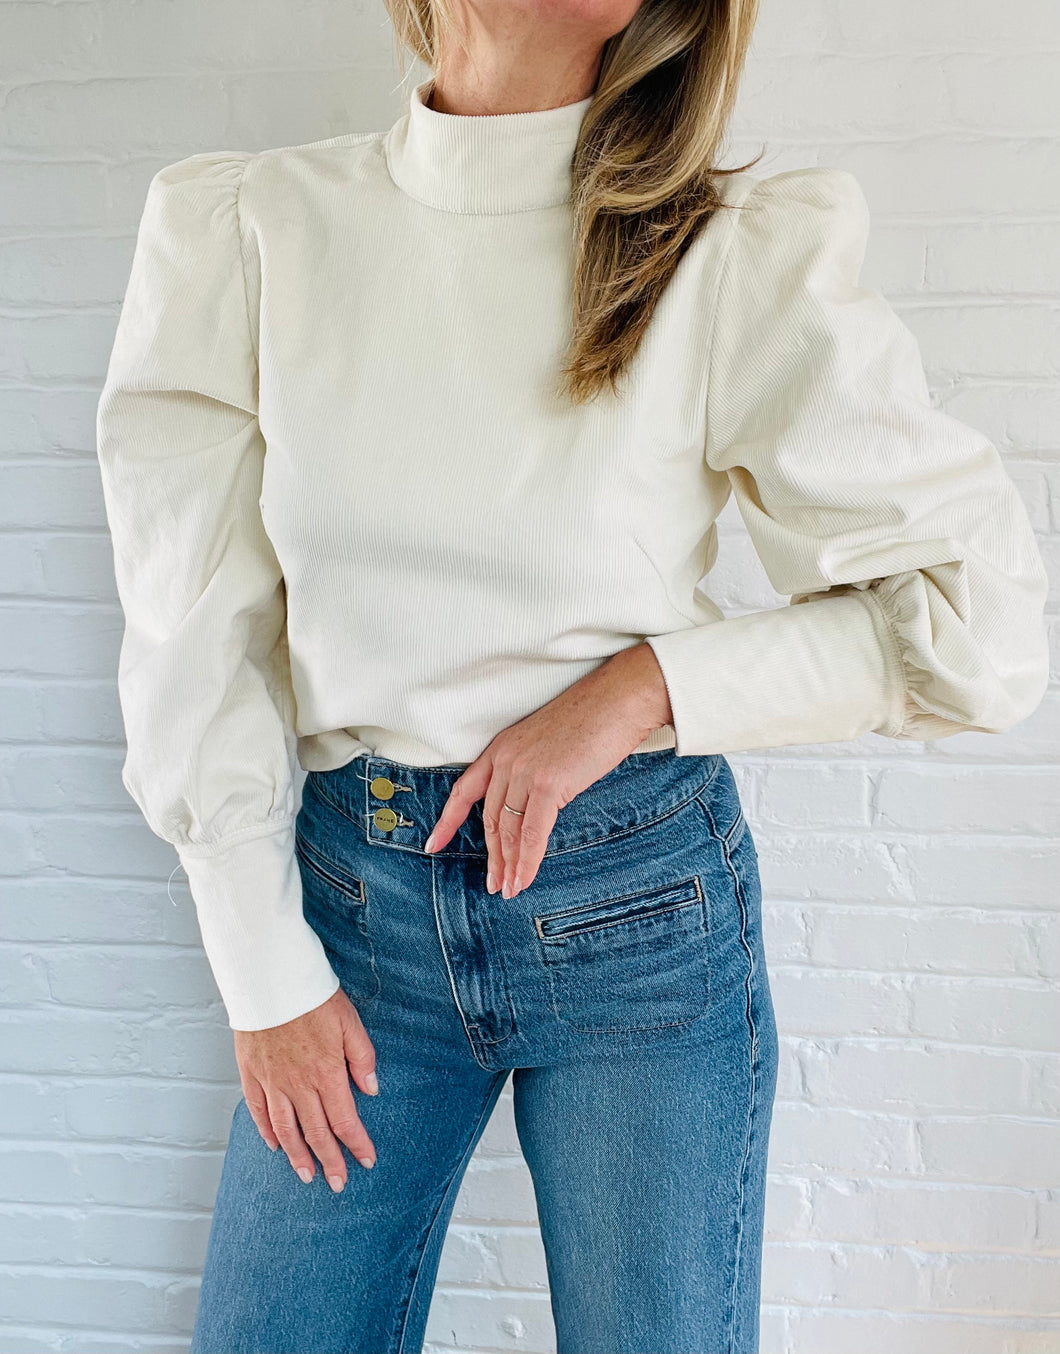 The Aude Top in off-white